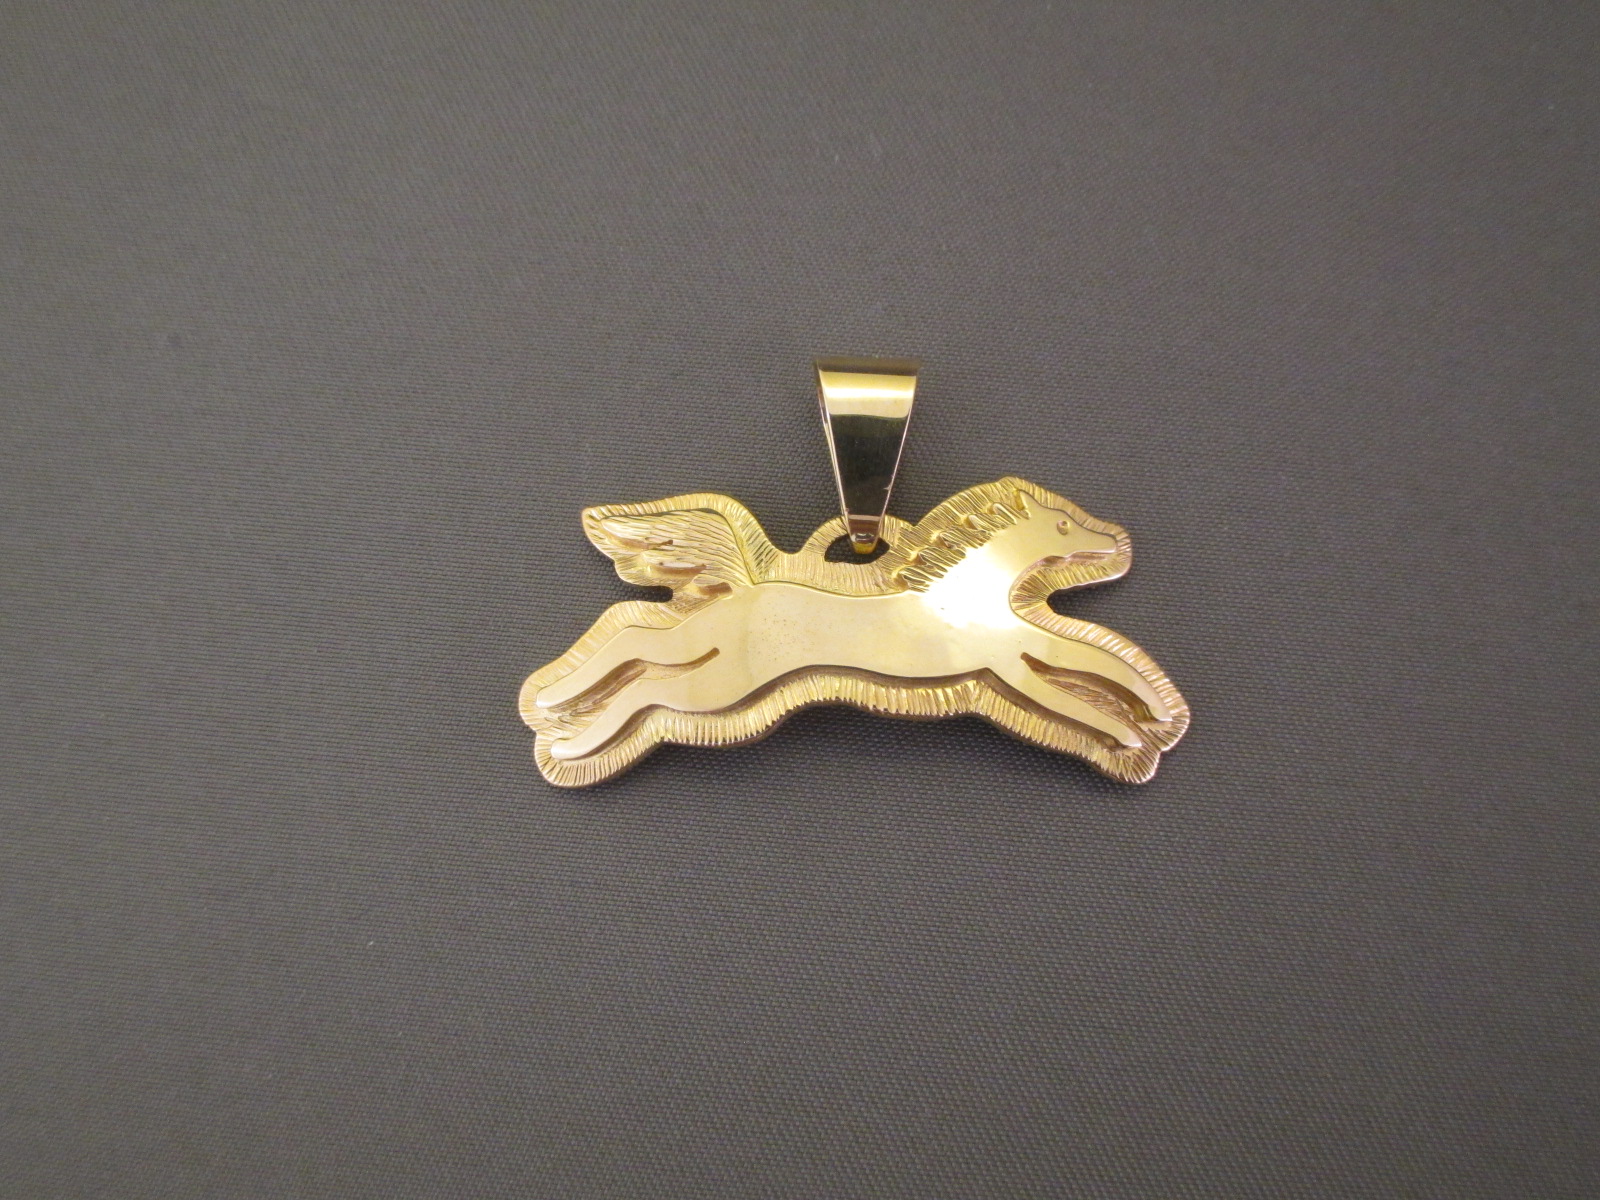 Gold Pendant - 14kt Gold 'HORSE' Pendant by Native American Indian jewelry artist, Dina Huntinghorse $1,100-